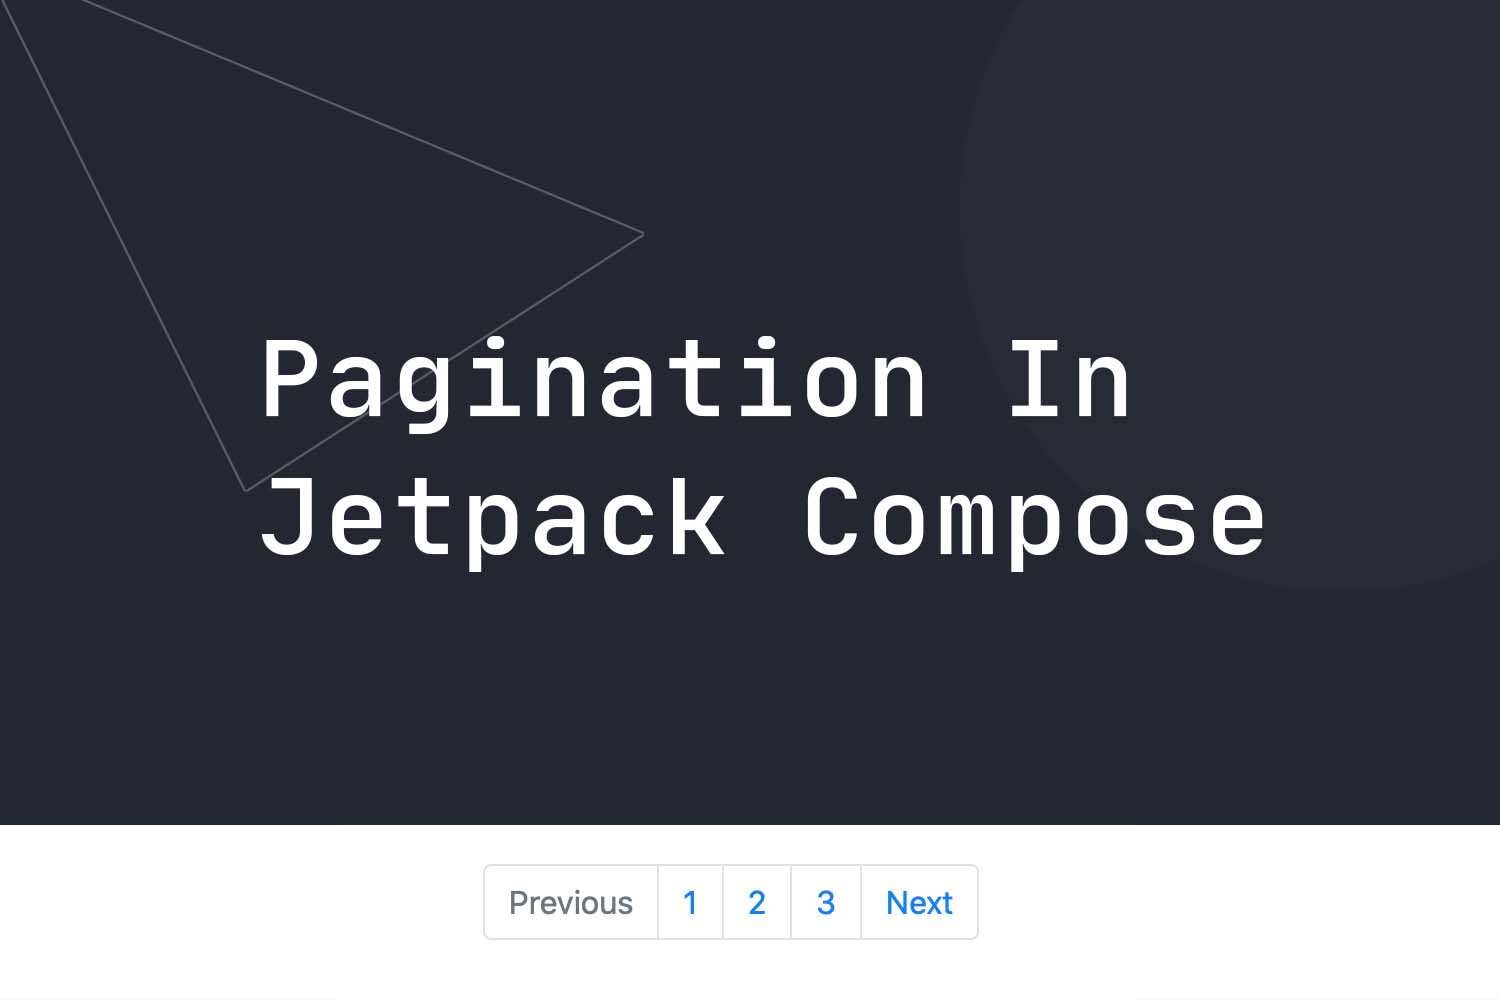 Pagination in Jetpack Compose